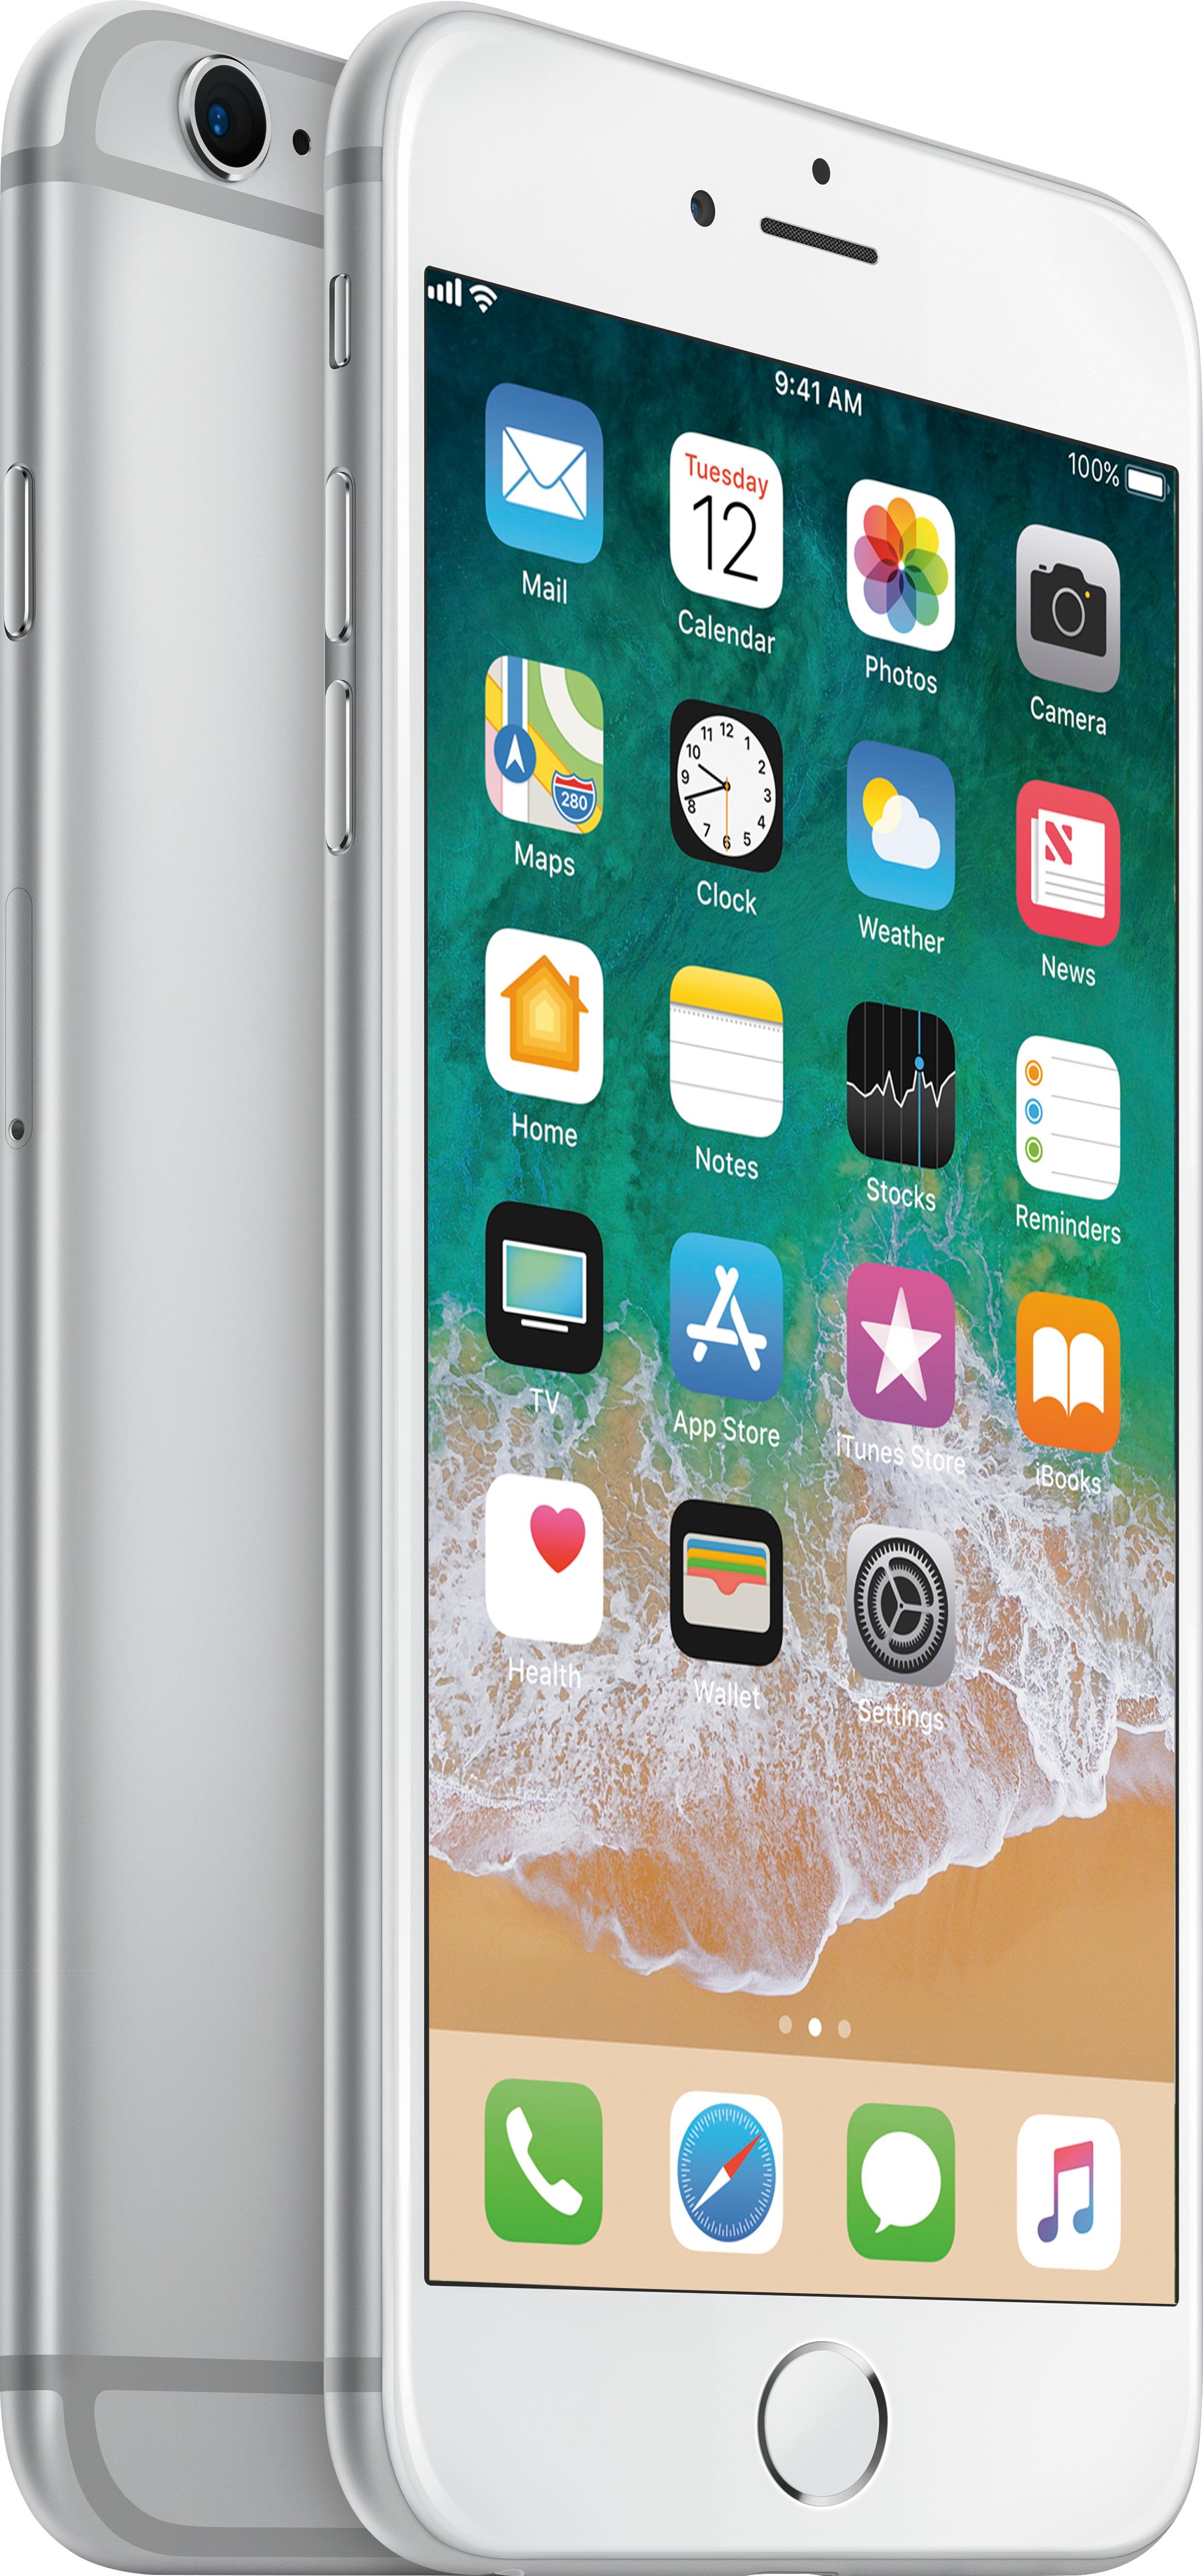 Best apps to show off your new iPhone 6 and 6 Plus! | iMore